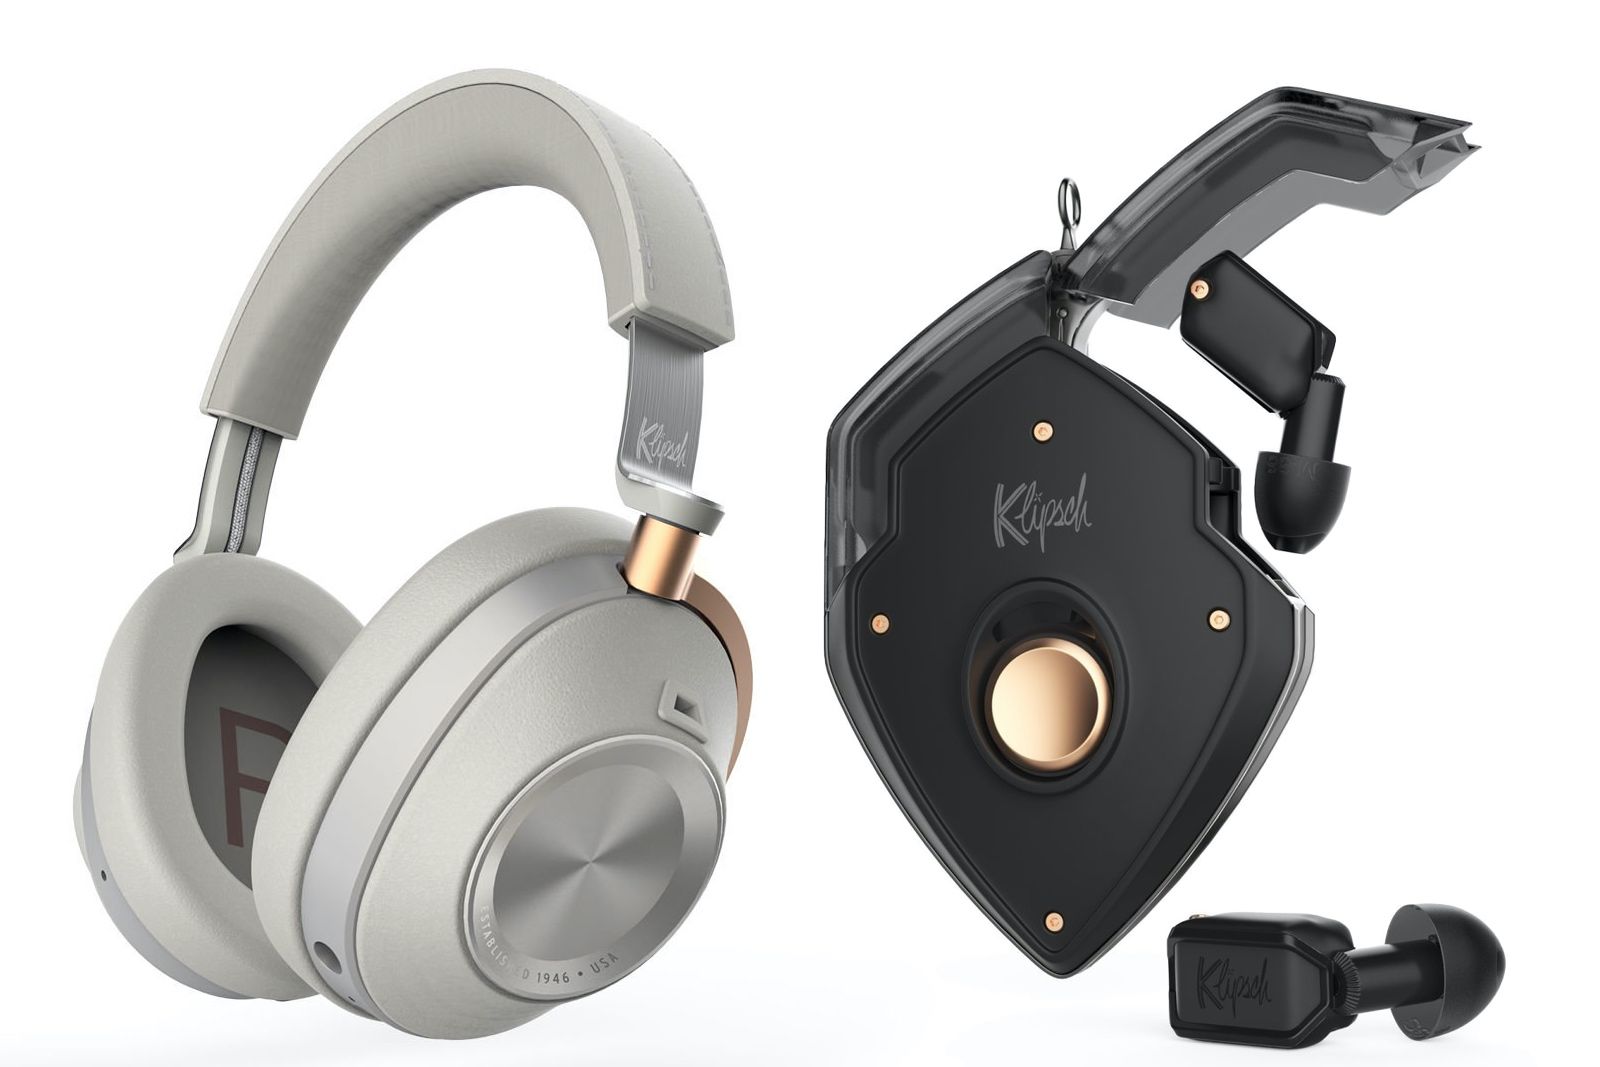 Klipsch will show off new noise-cancelling and wireless headphones at CES 2020 image 1